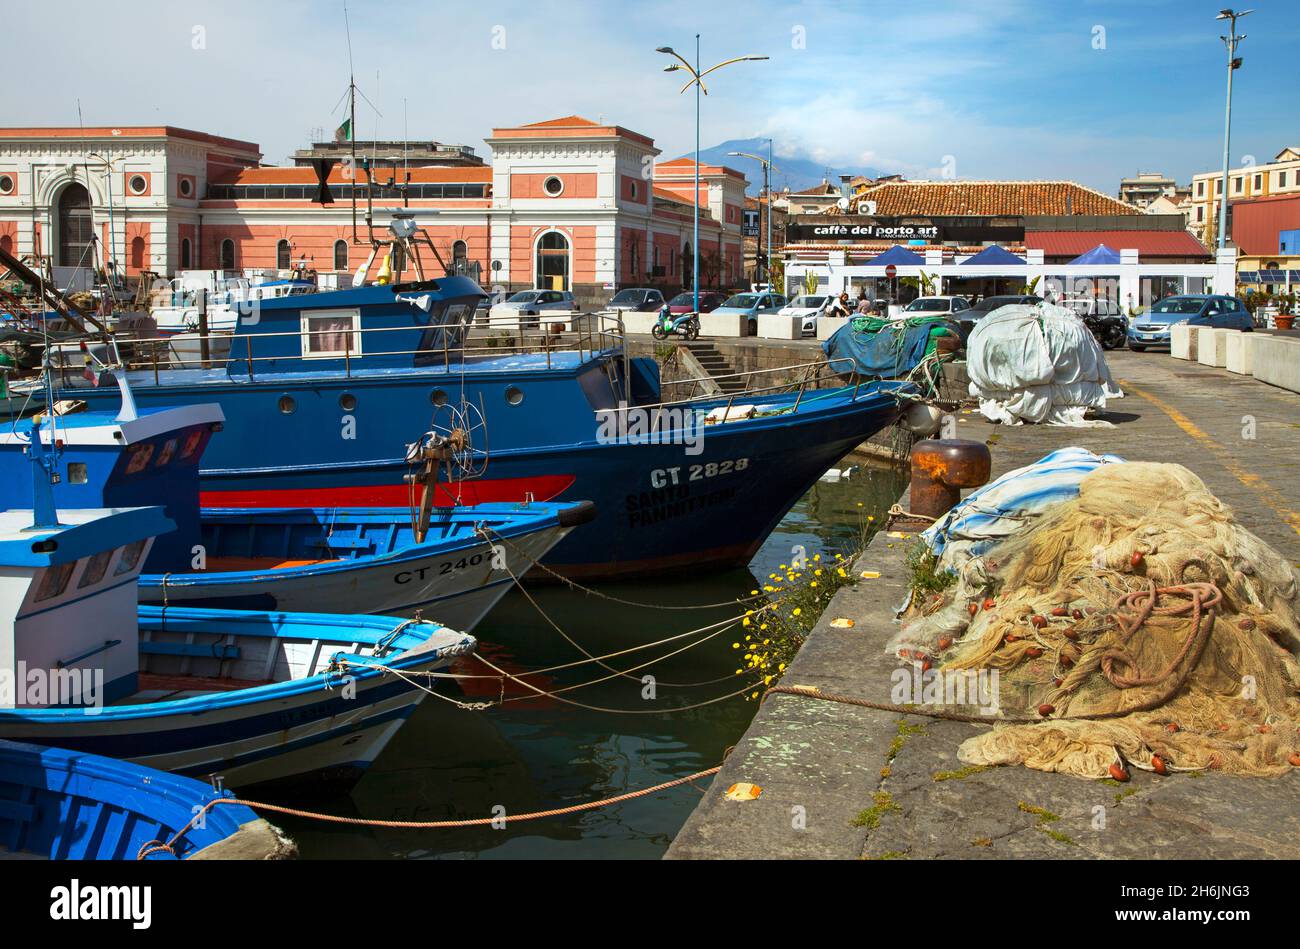 Catania Harbour Sicily Italy EU Europe moored fishing boats nets buildings Etna erupting in background copy space flowers in quayside wall cafe Stock Photo